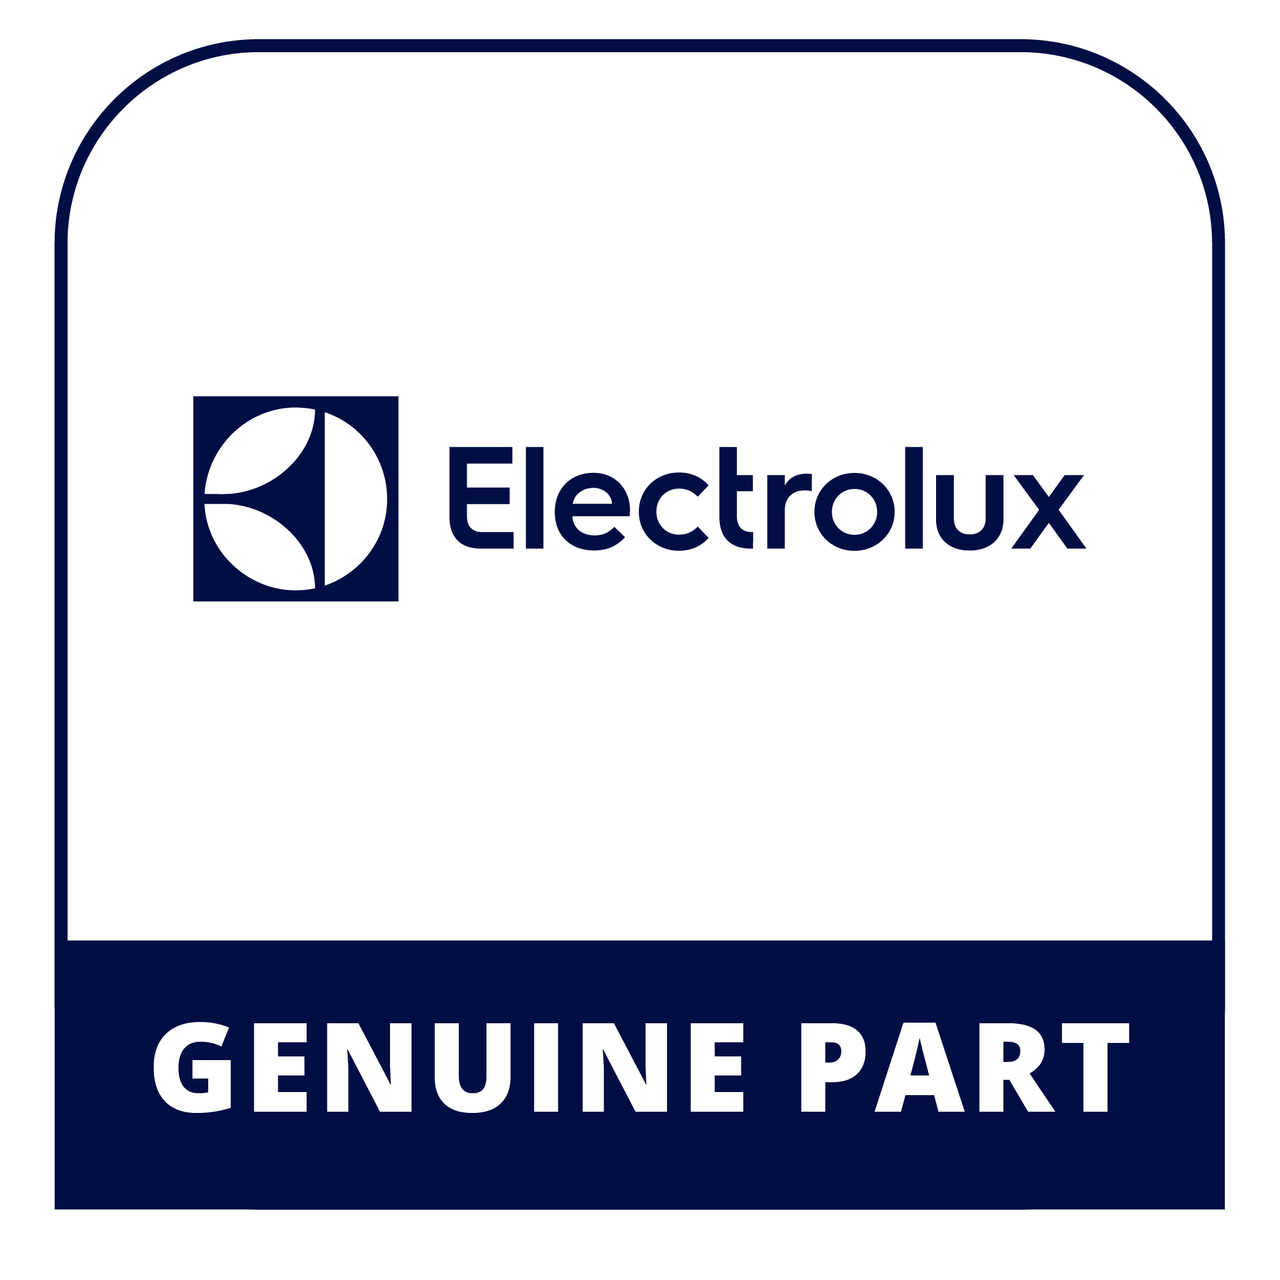 Frigidaire - Electrolux 242111201 Owners Manual - Genuine Electrolux Part